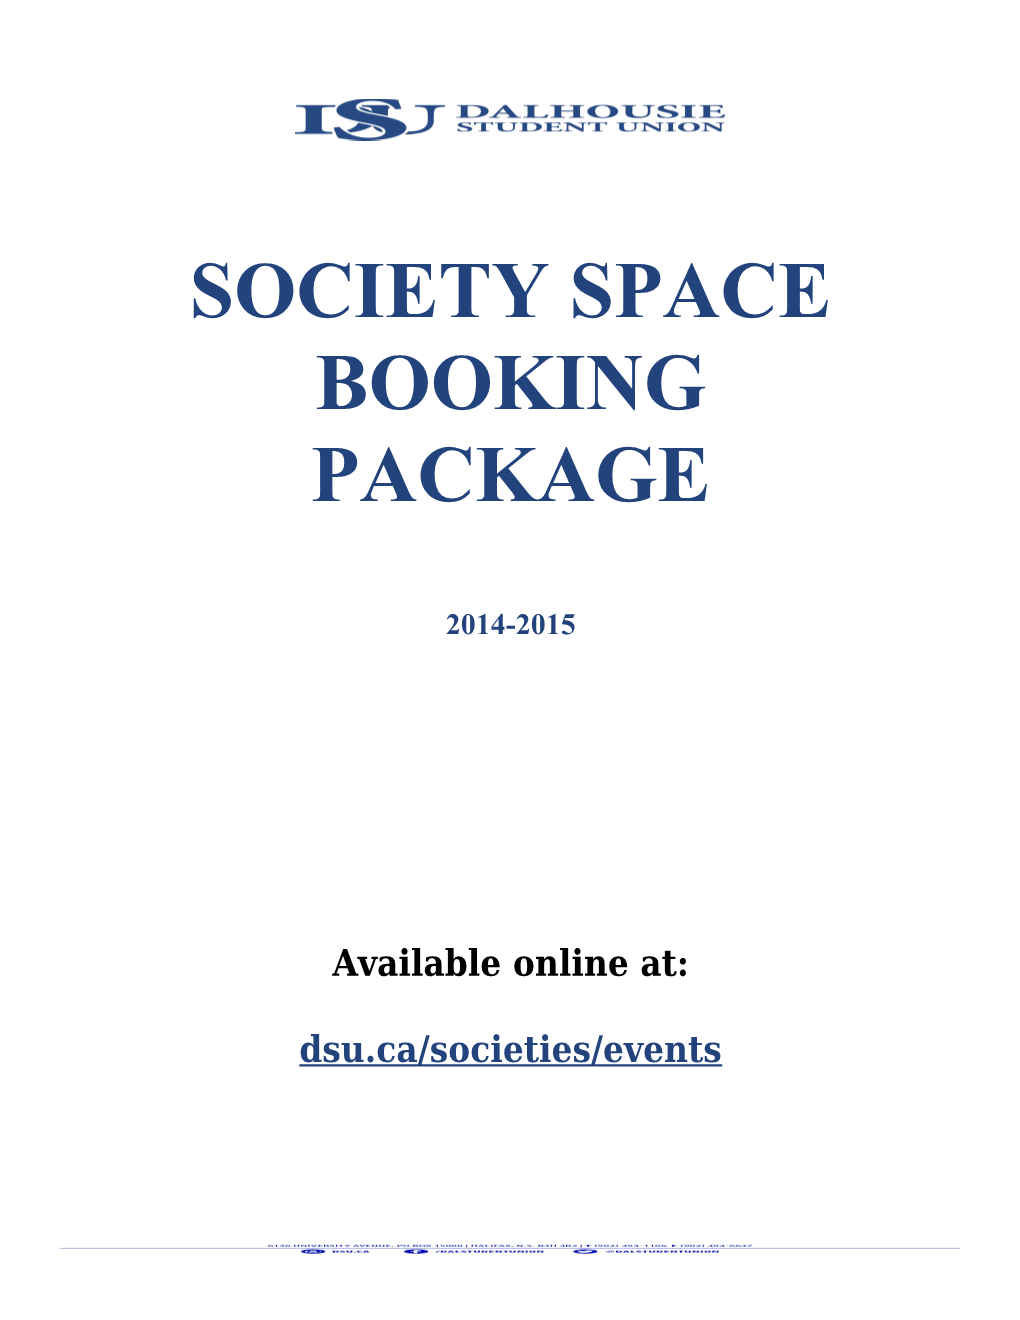 Society Space Booking Package